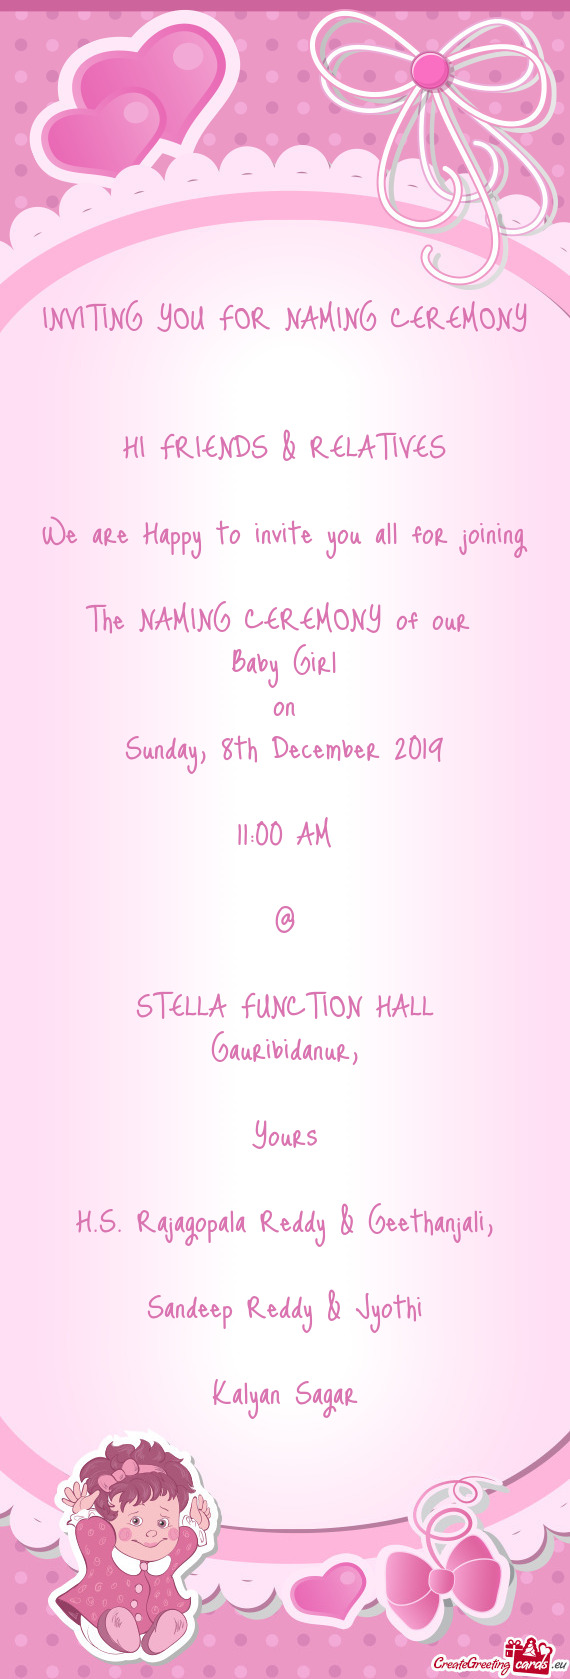 INVITING YOU FOR NAMING CEREMONY